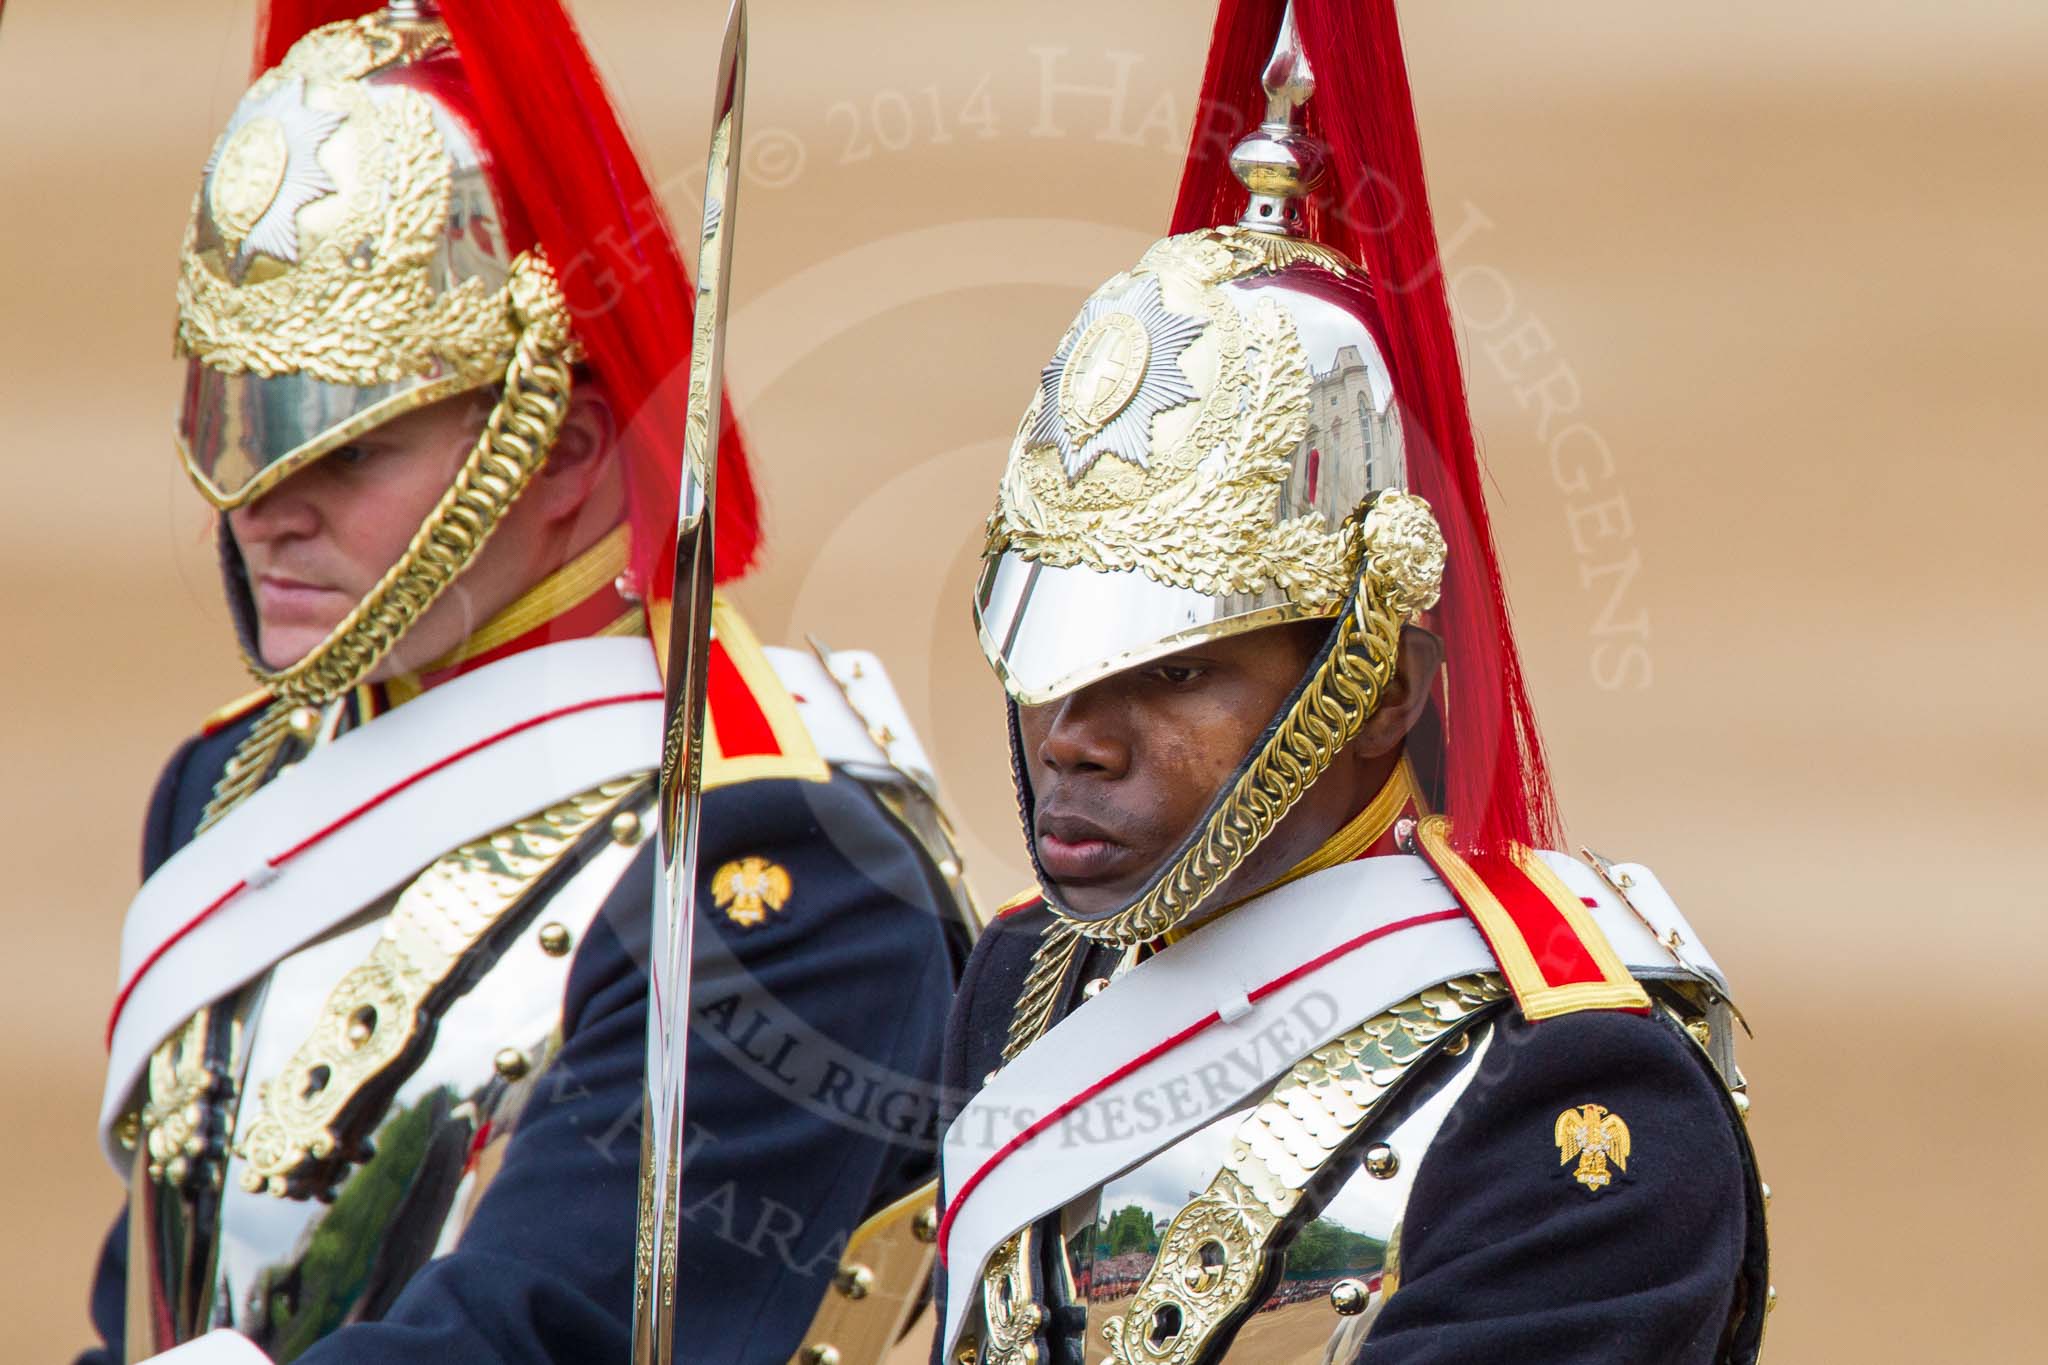 Trooping the Colour 2014.
Horse Guards Parade, Westminster,
London SW1A,

United Kingdom,
on 14 June 2014 at 10:57, image #330